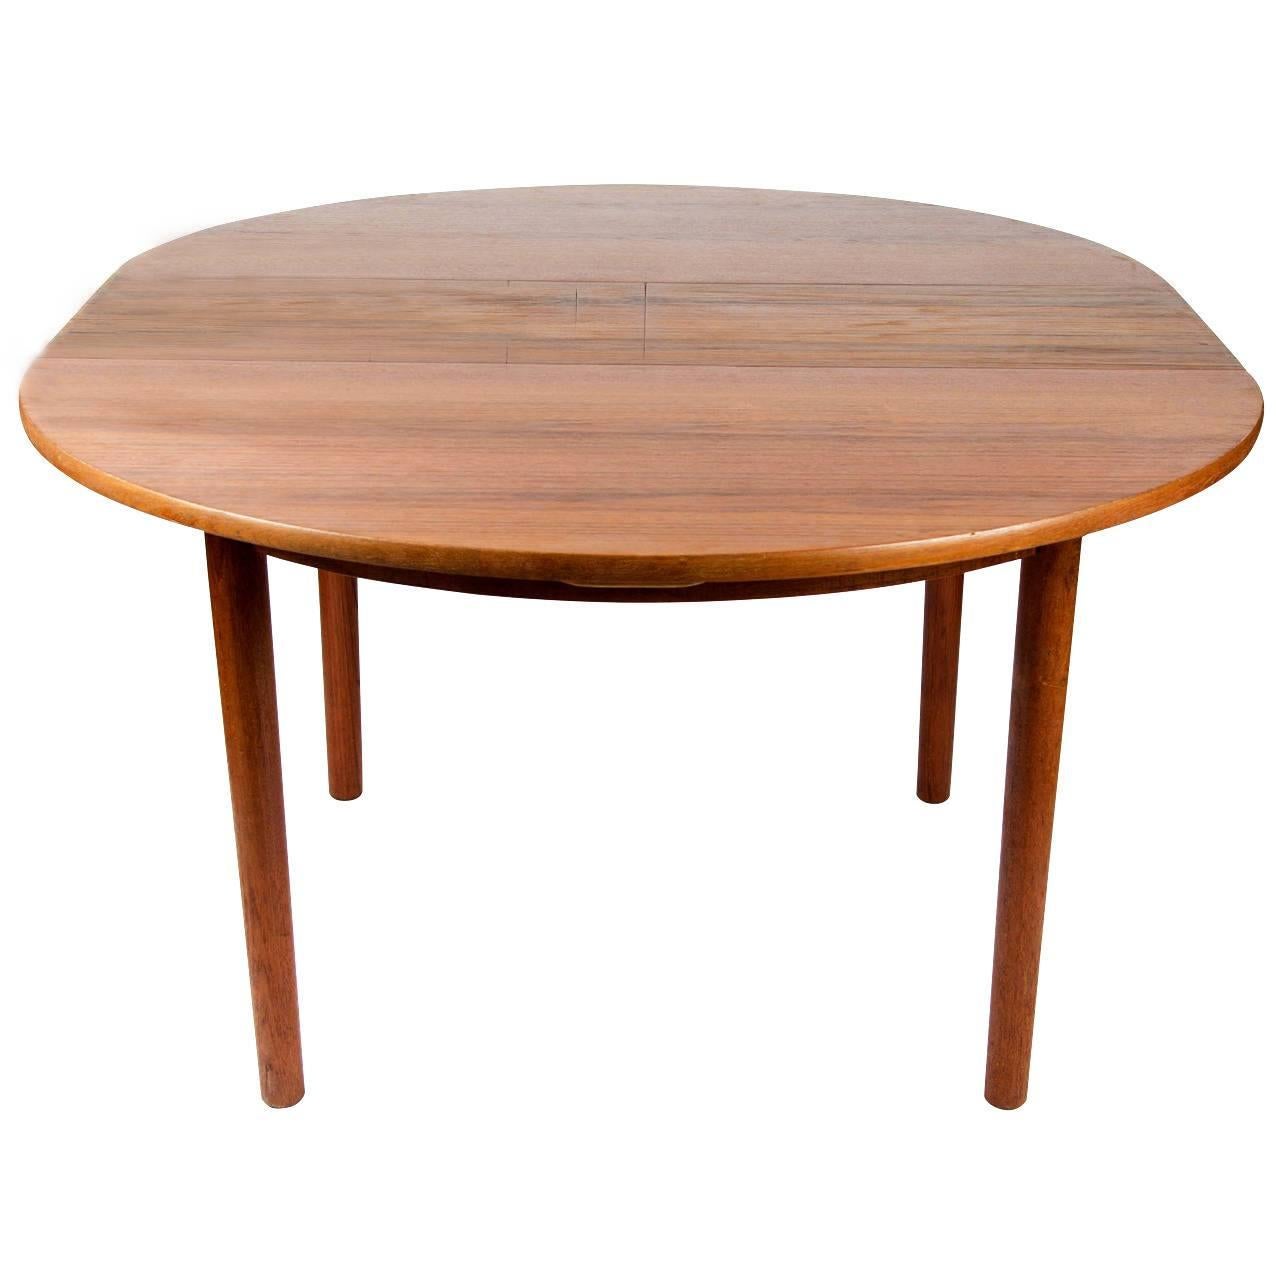 A fine example from Dalescraft Furniture maker. A Danish inspired teak extending dining table, designed by Malcolm Walker. A beautiful grain and colour, circa the 1960s.